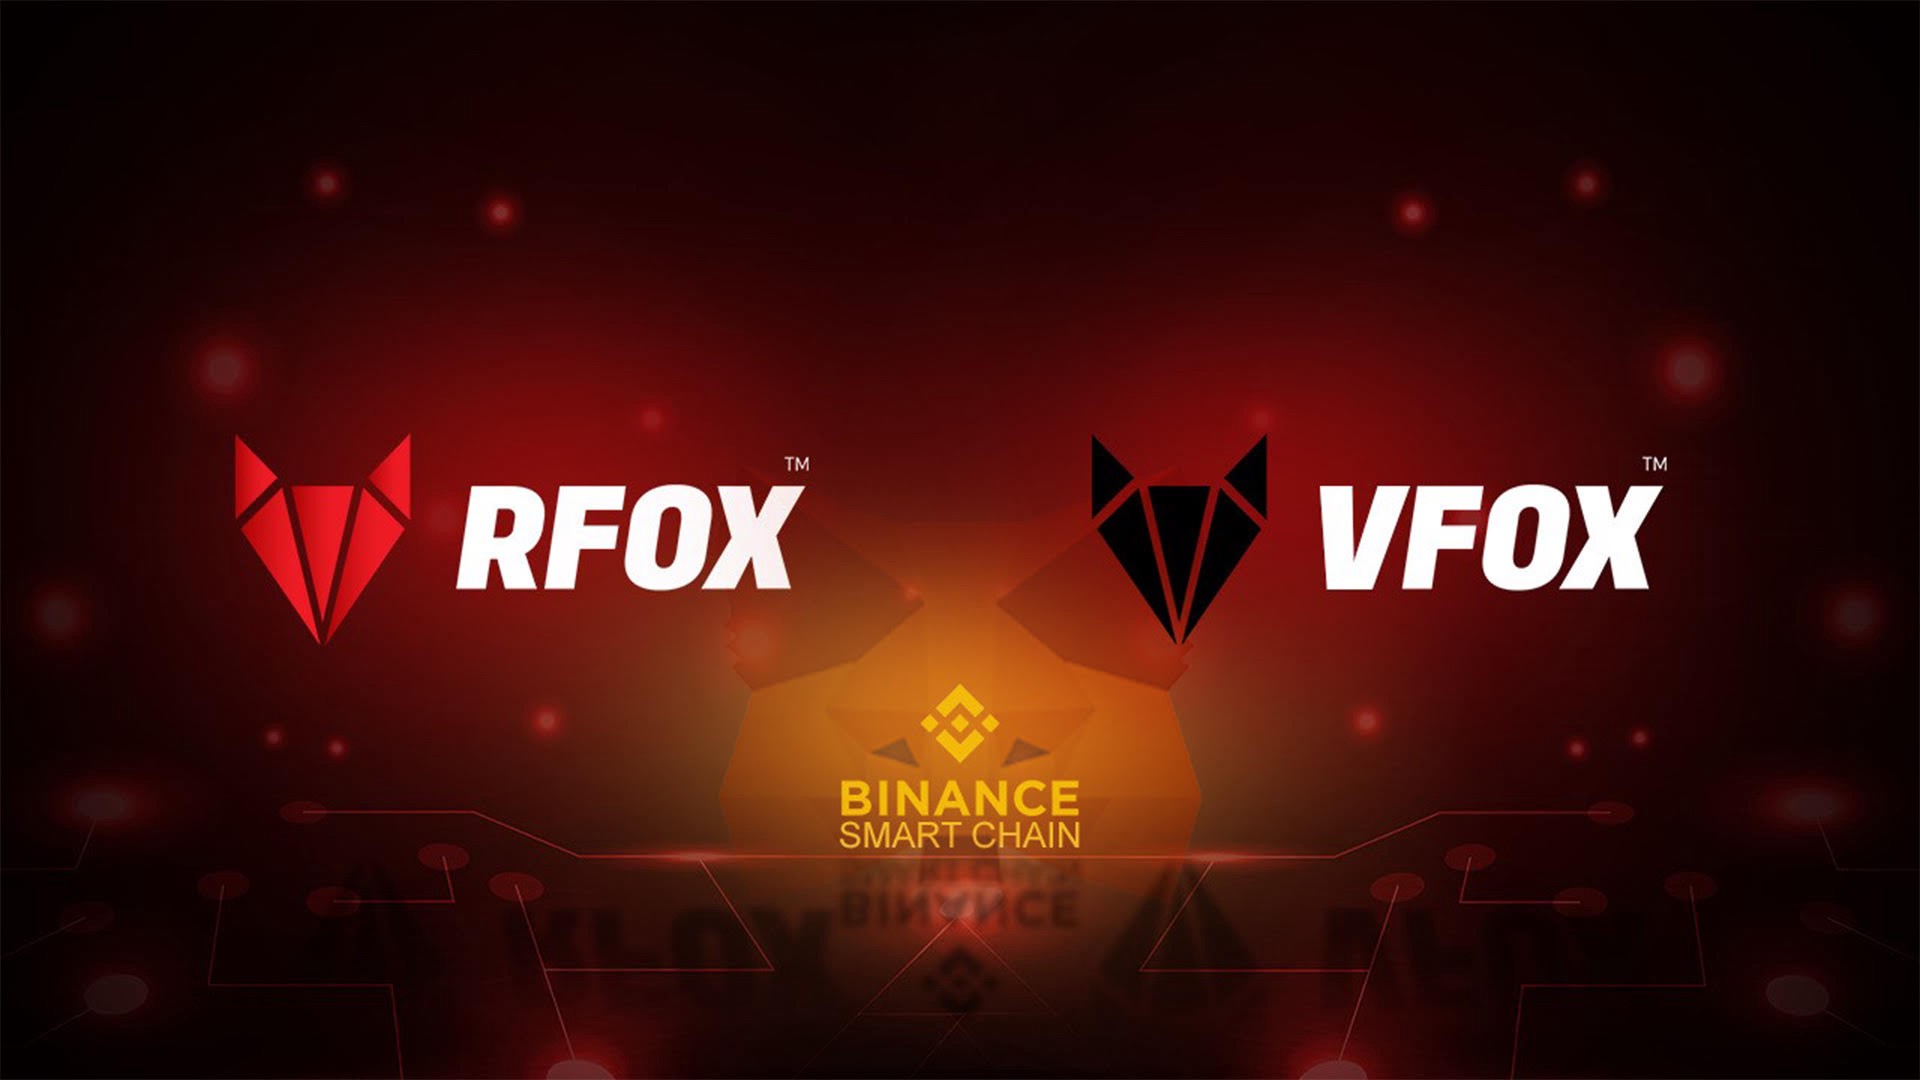 Premium DeFi Protocol from RedFOX Labs Now Live on Binance Smart Chain